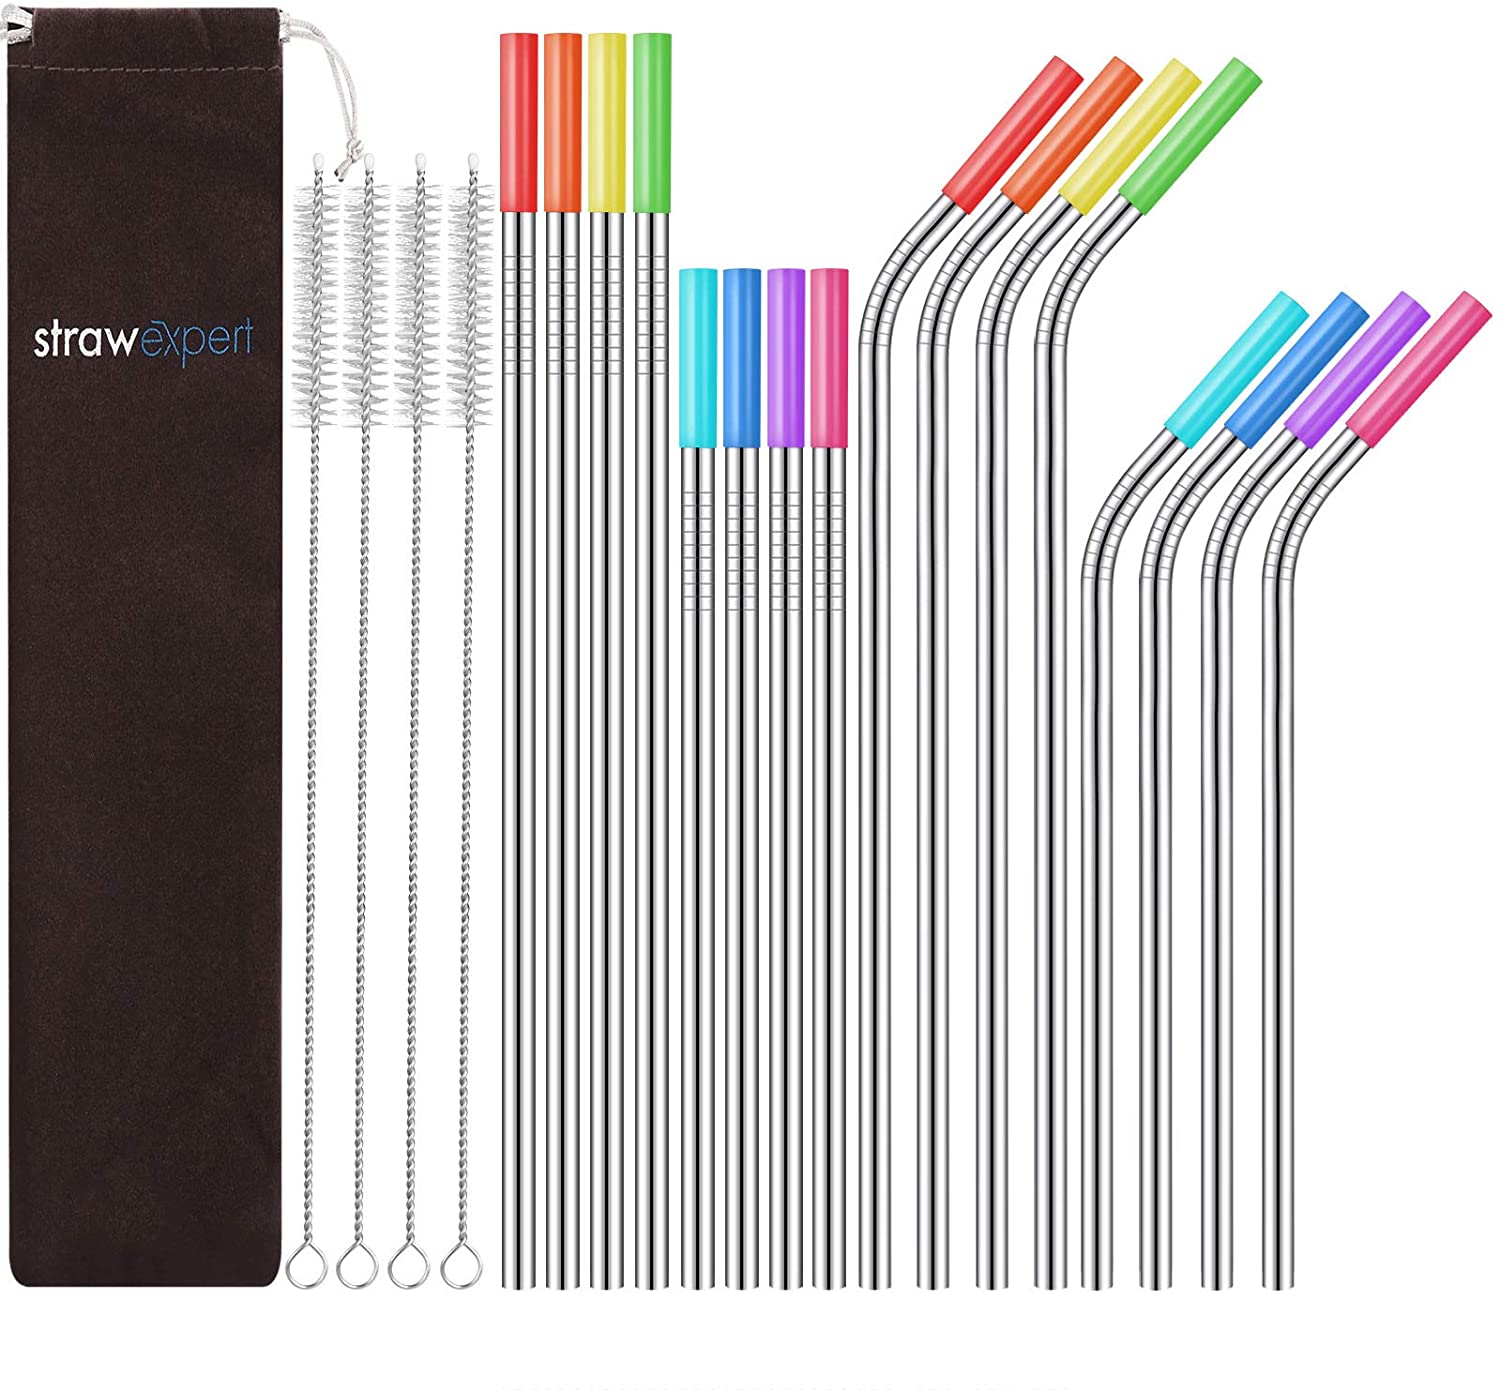 Set of 16 Reusable Stainless Steel Straws with Silicone Tips | Travel Case | Cleaning Brush by StrawExpert | Green Stocking Stuffers | Amazon Stocking Stuffers | Stocking stuffers for adults | stocking stuffers for men | mens stocking stuffers | Stocking stuffers for her | Stocking stuffers for guys | Cheap stocking stuffers | Best stocking stuffers | Stocking stuffers for wife | stocking stuffer gifts